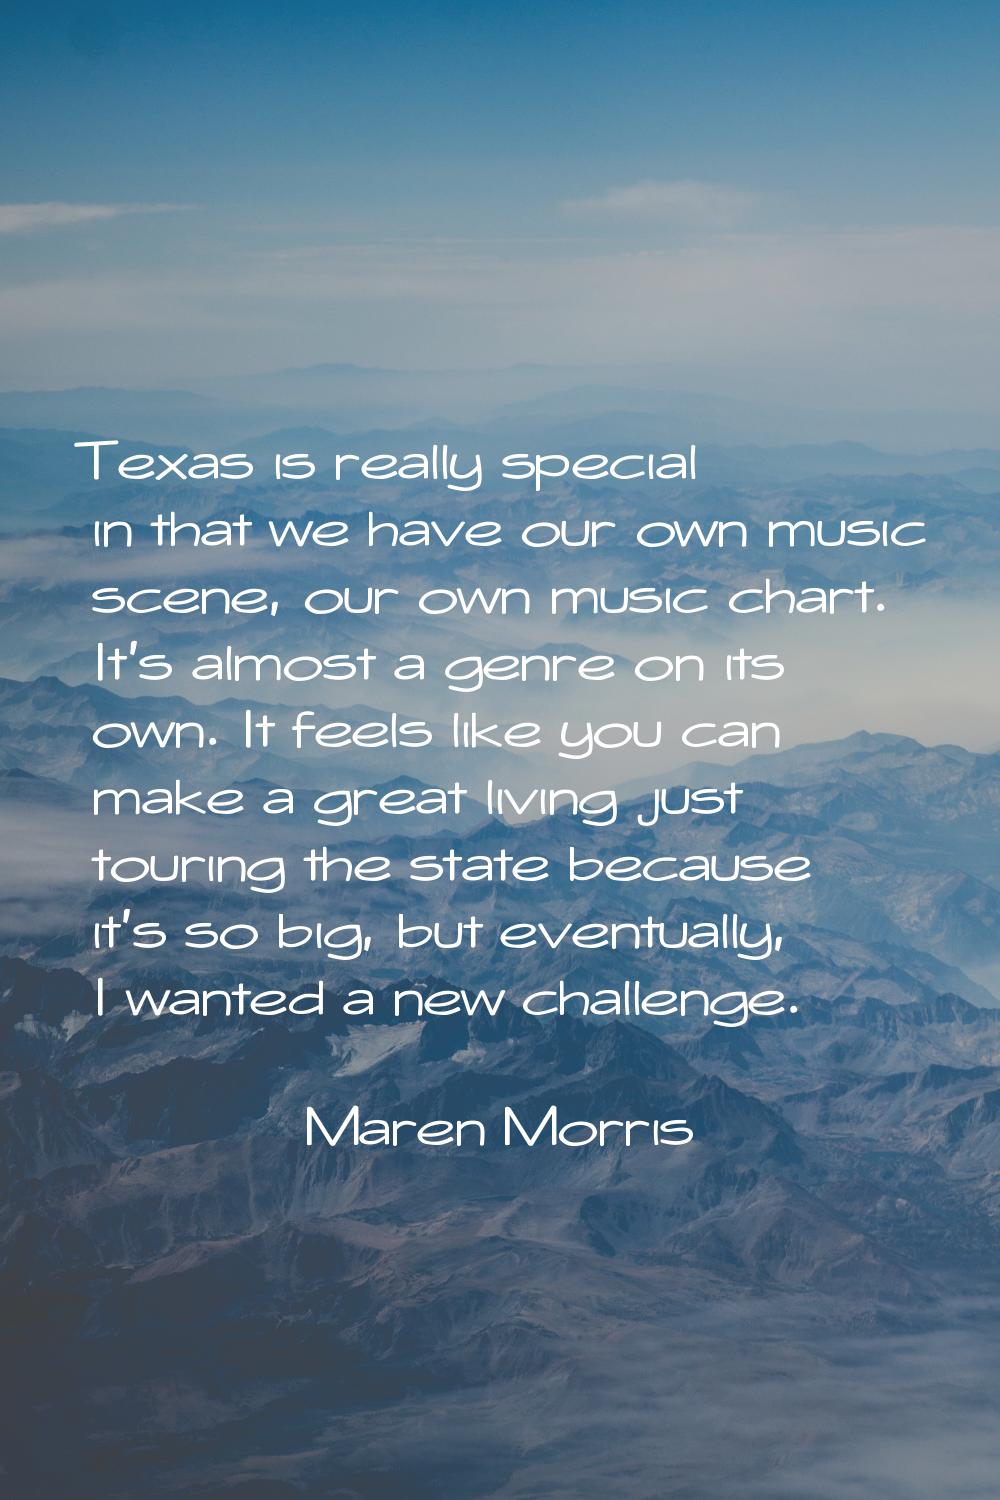 Texas is really special in that we have our own music scene, our own music chart. It's almost a gen